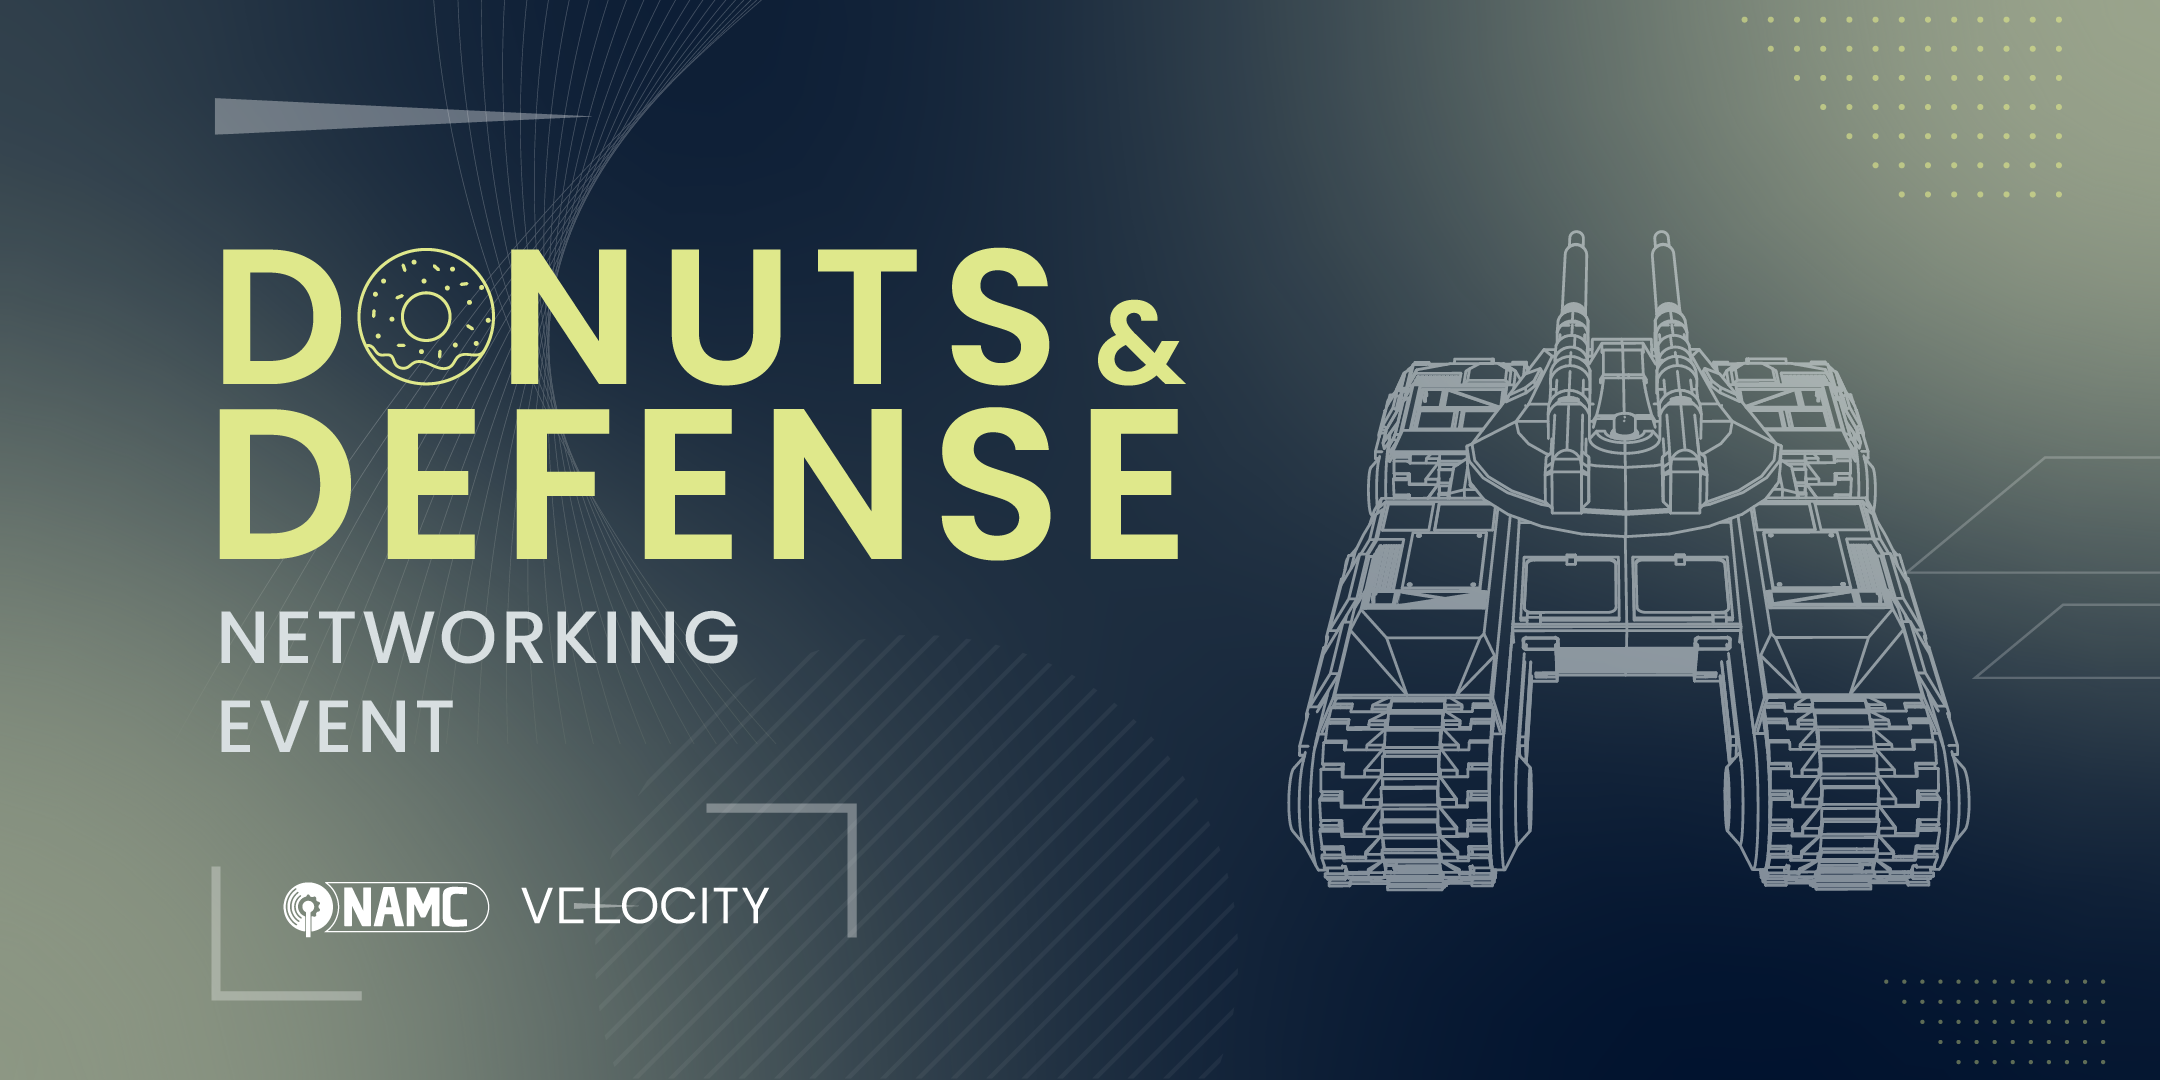 Donuts & Defense Networking Event